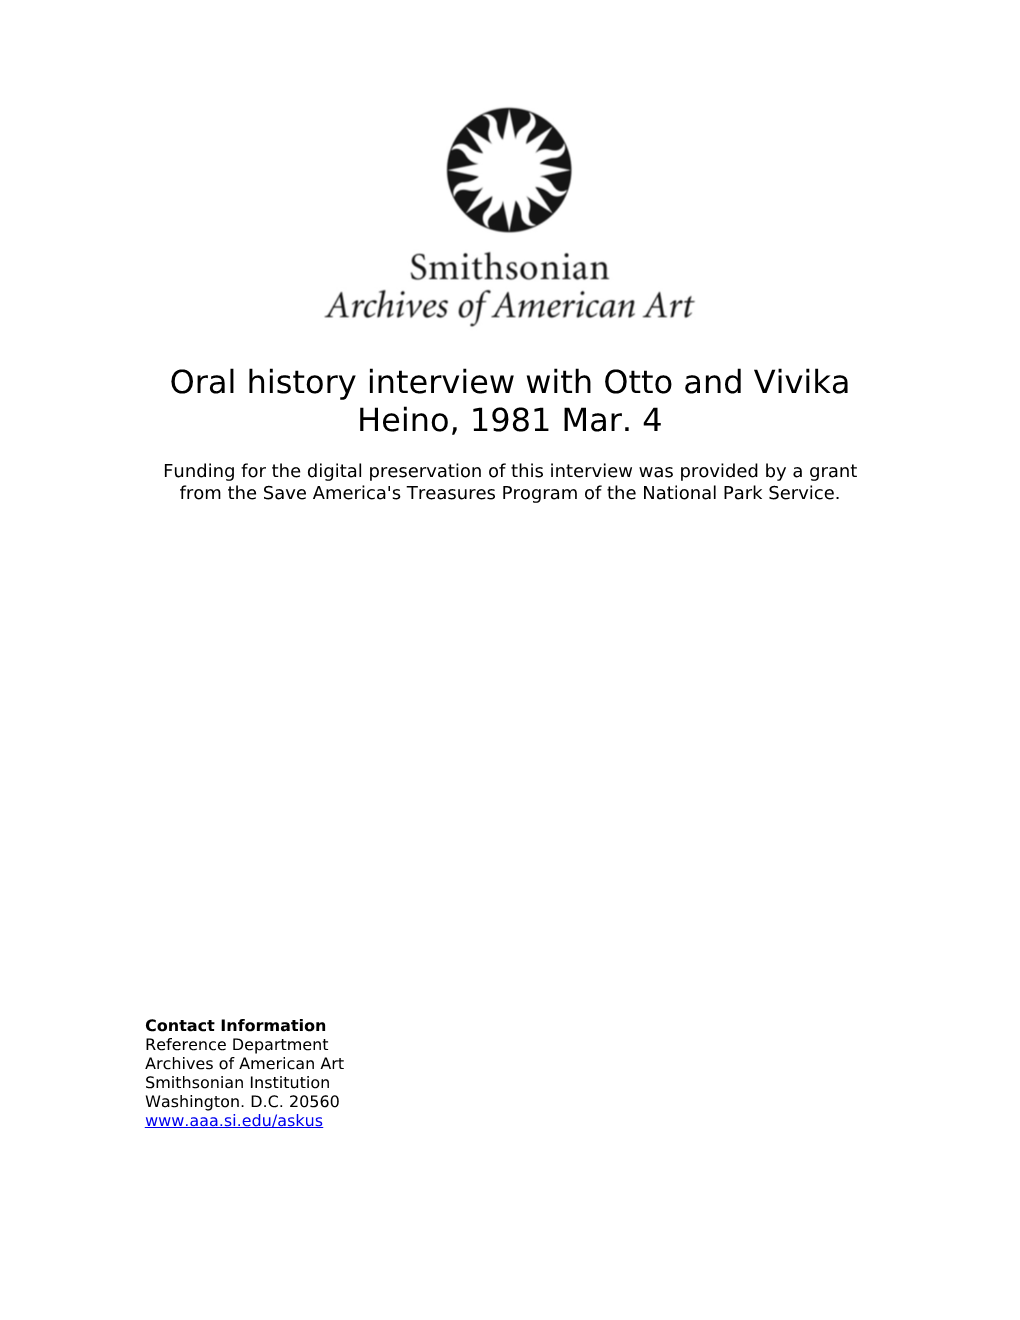 Oral History Interview with Otto and Vivika Heino, 1981 Mar. 4